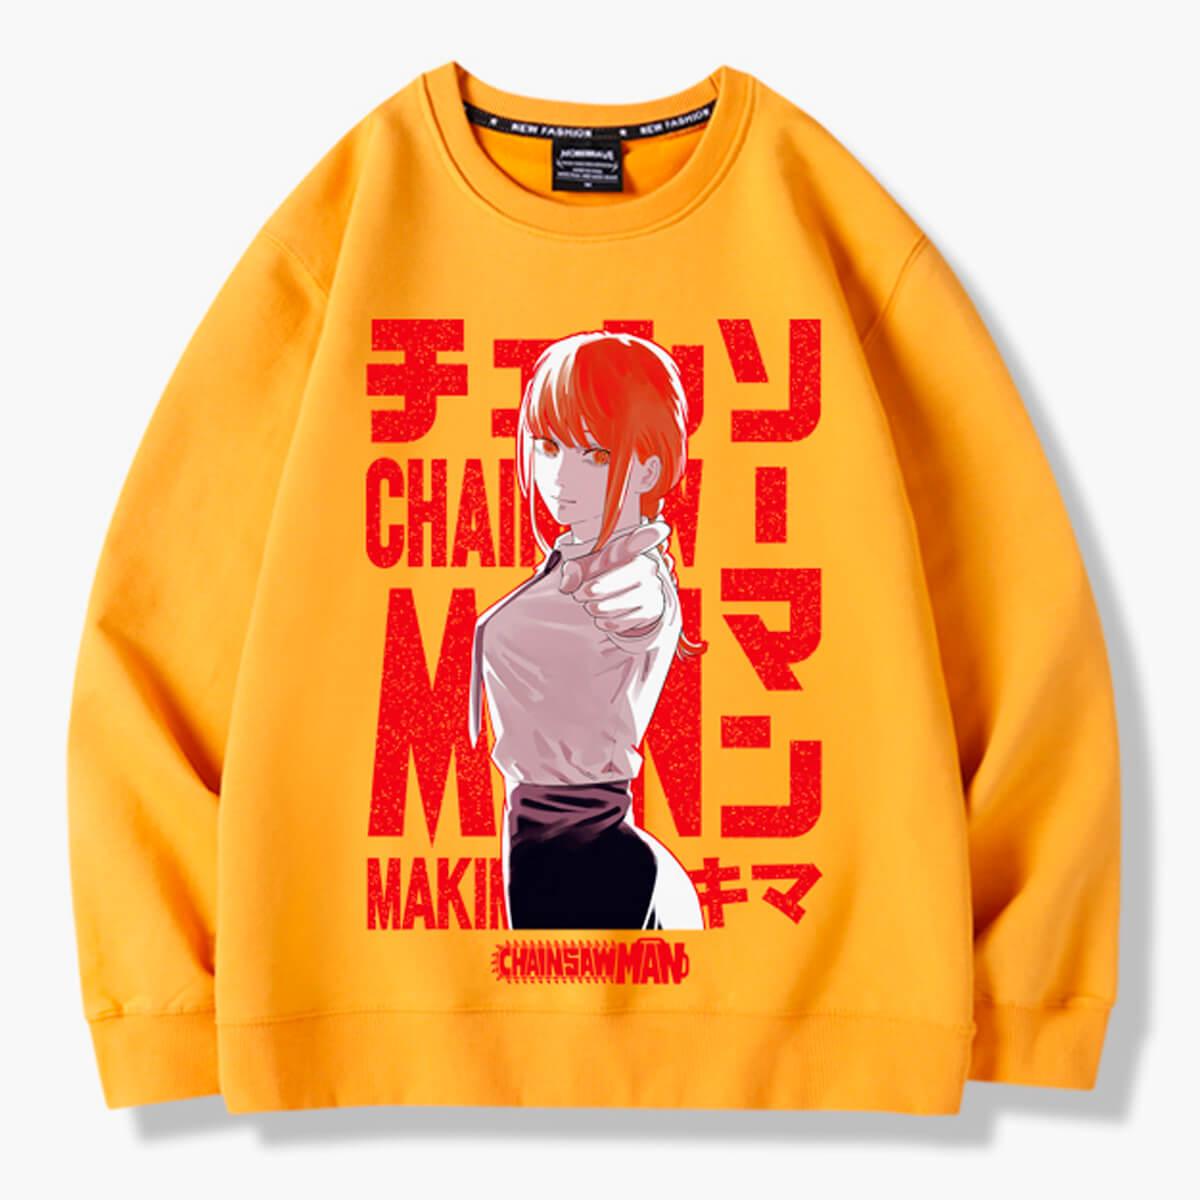 Makima Pointing Hand Chainsaw Man Sweatshirt - Aesthetic Clothes Shop